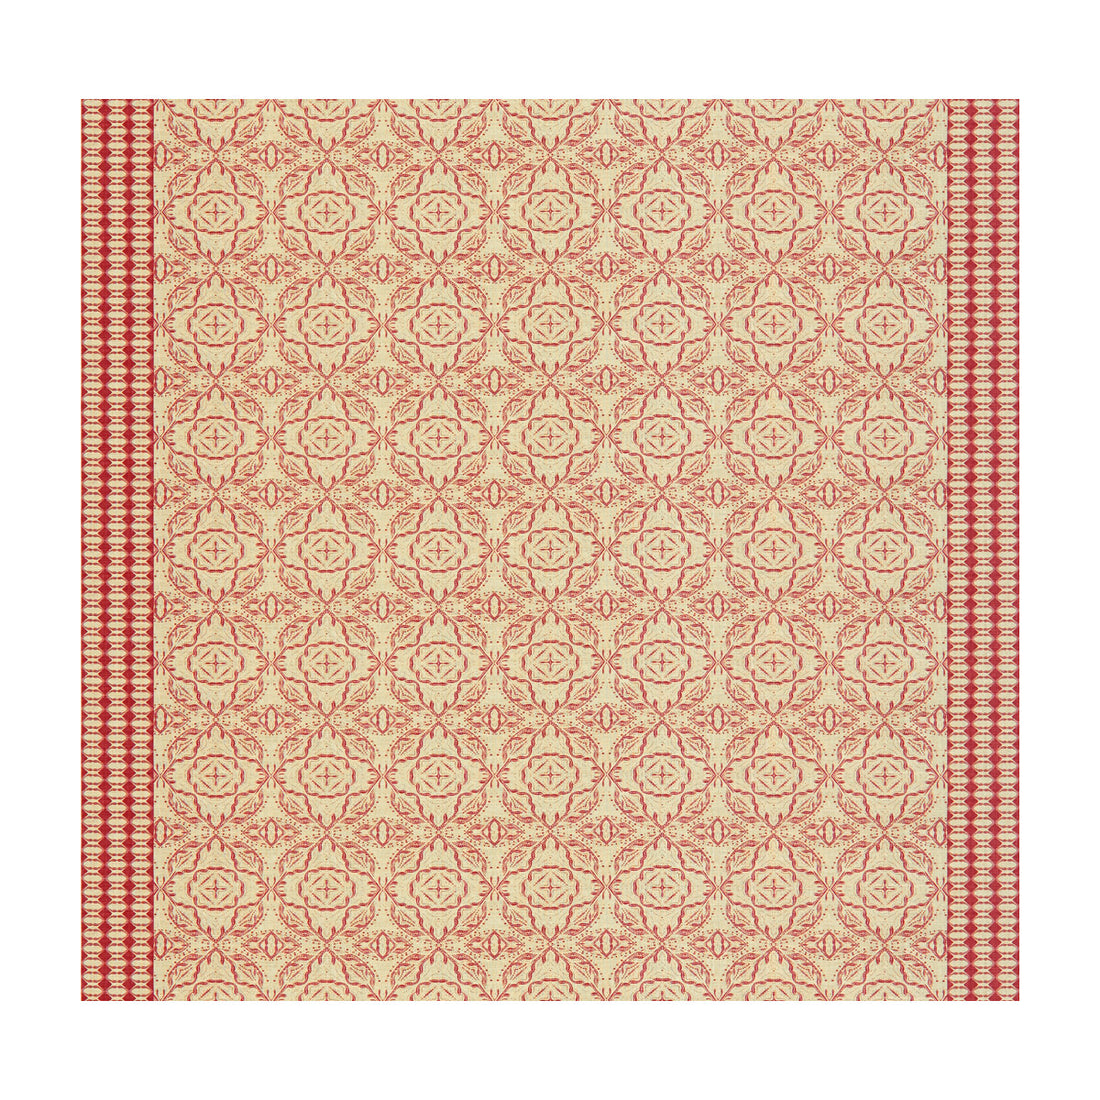 Maze fabric in cerise color - pattern GWF-3506.7.0 - by Lee Jofa Modern in the Allegra Hicks Garden collection